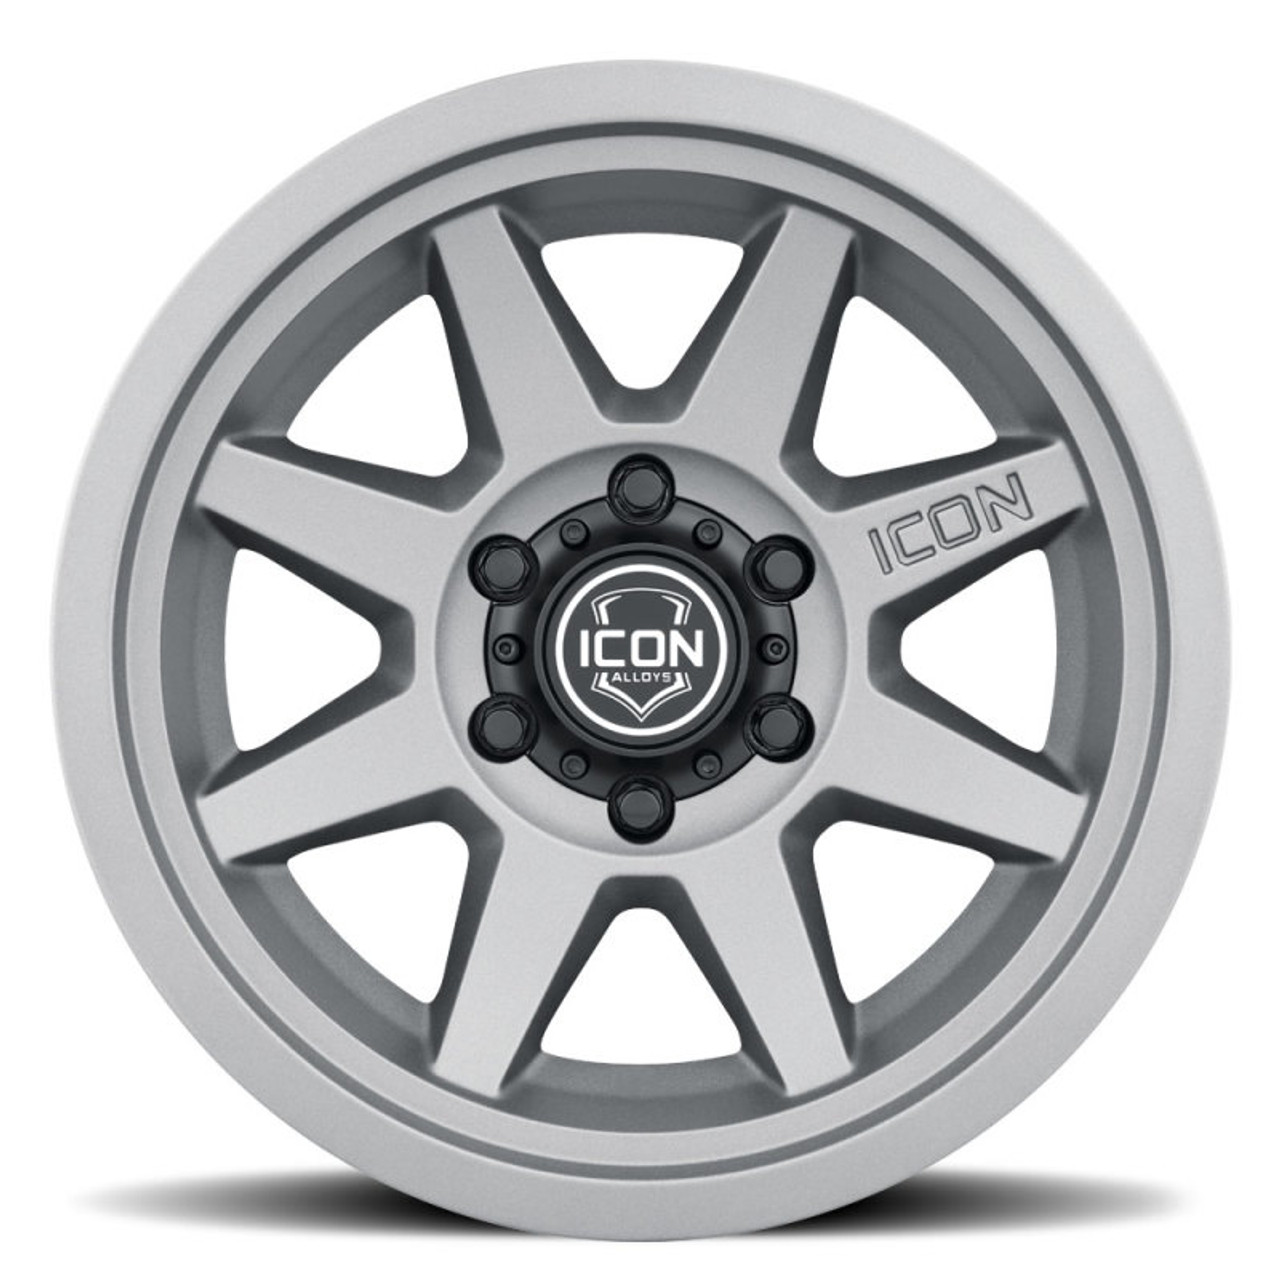 ICON Rebound 17x8.5 6x5.5 0mm Offset 4.75in BS 106.1mm Bore Charcoal Wheel - 1917858347CH Photo - Close Up